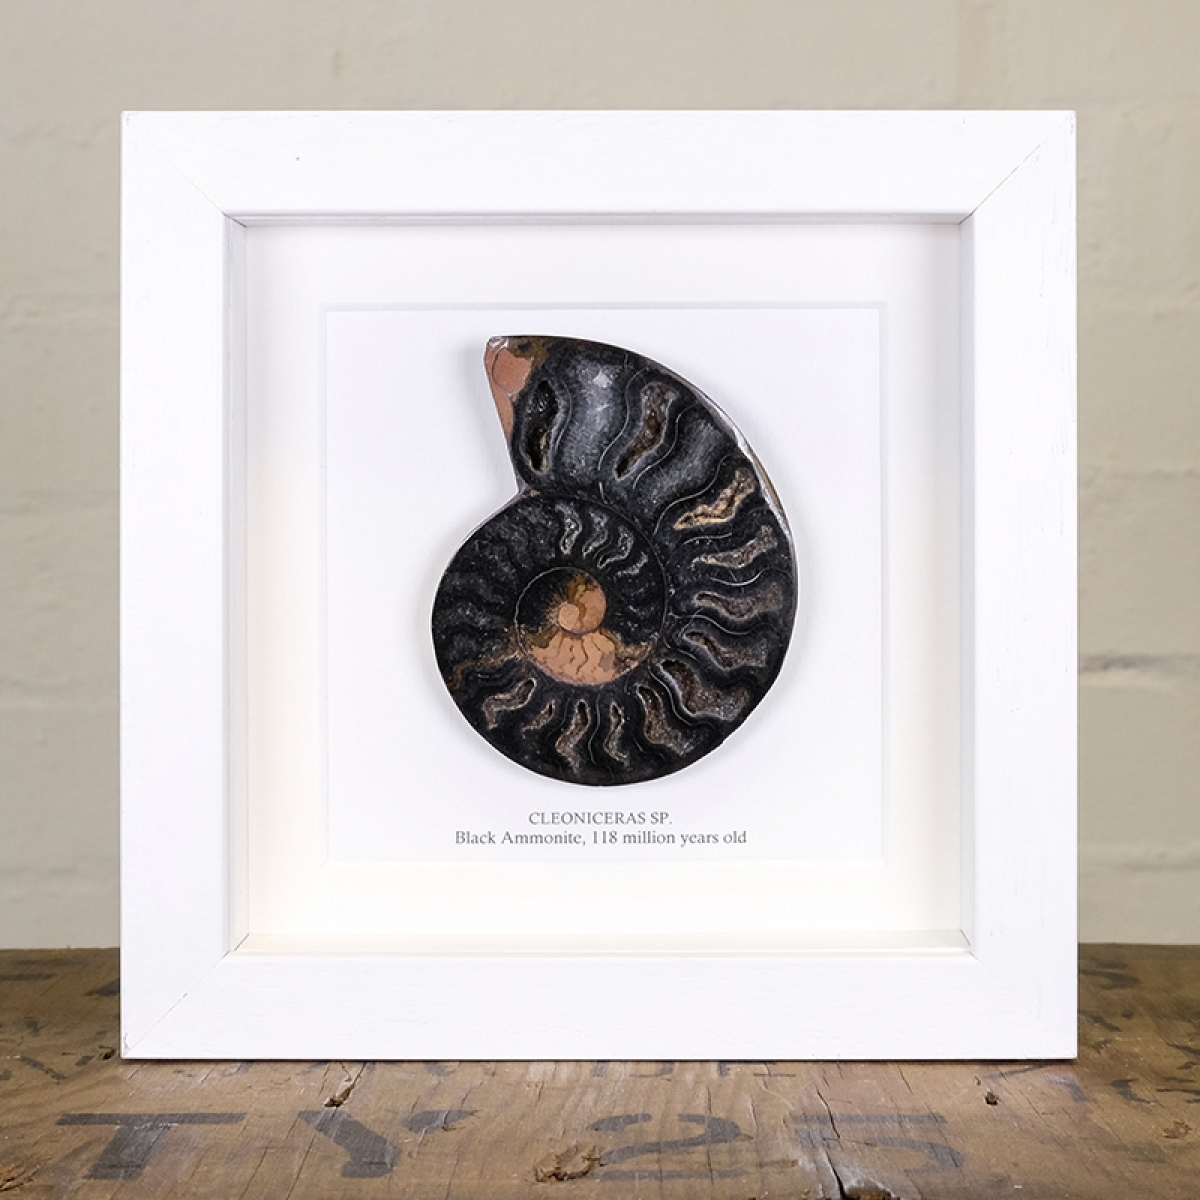 Black Ammonite Cut and Polished Fossil in Box Frame (Cleoniceras sp) - Specimen #03